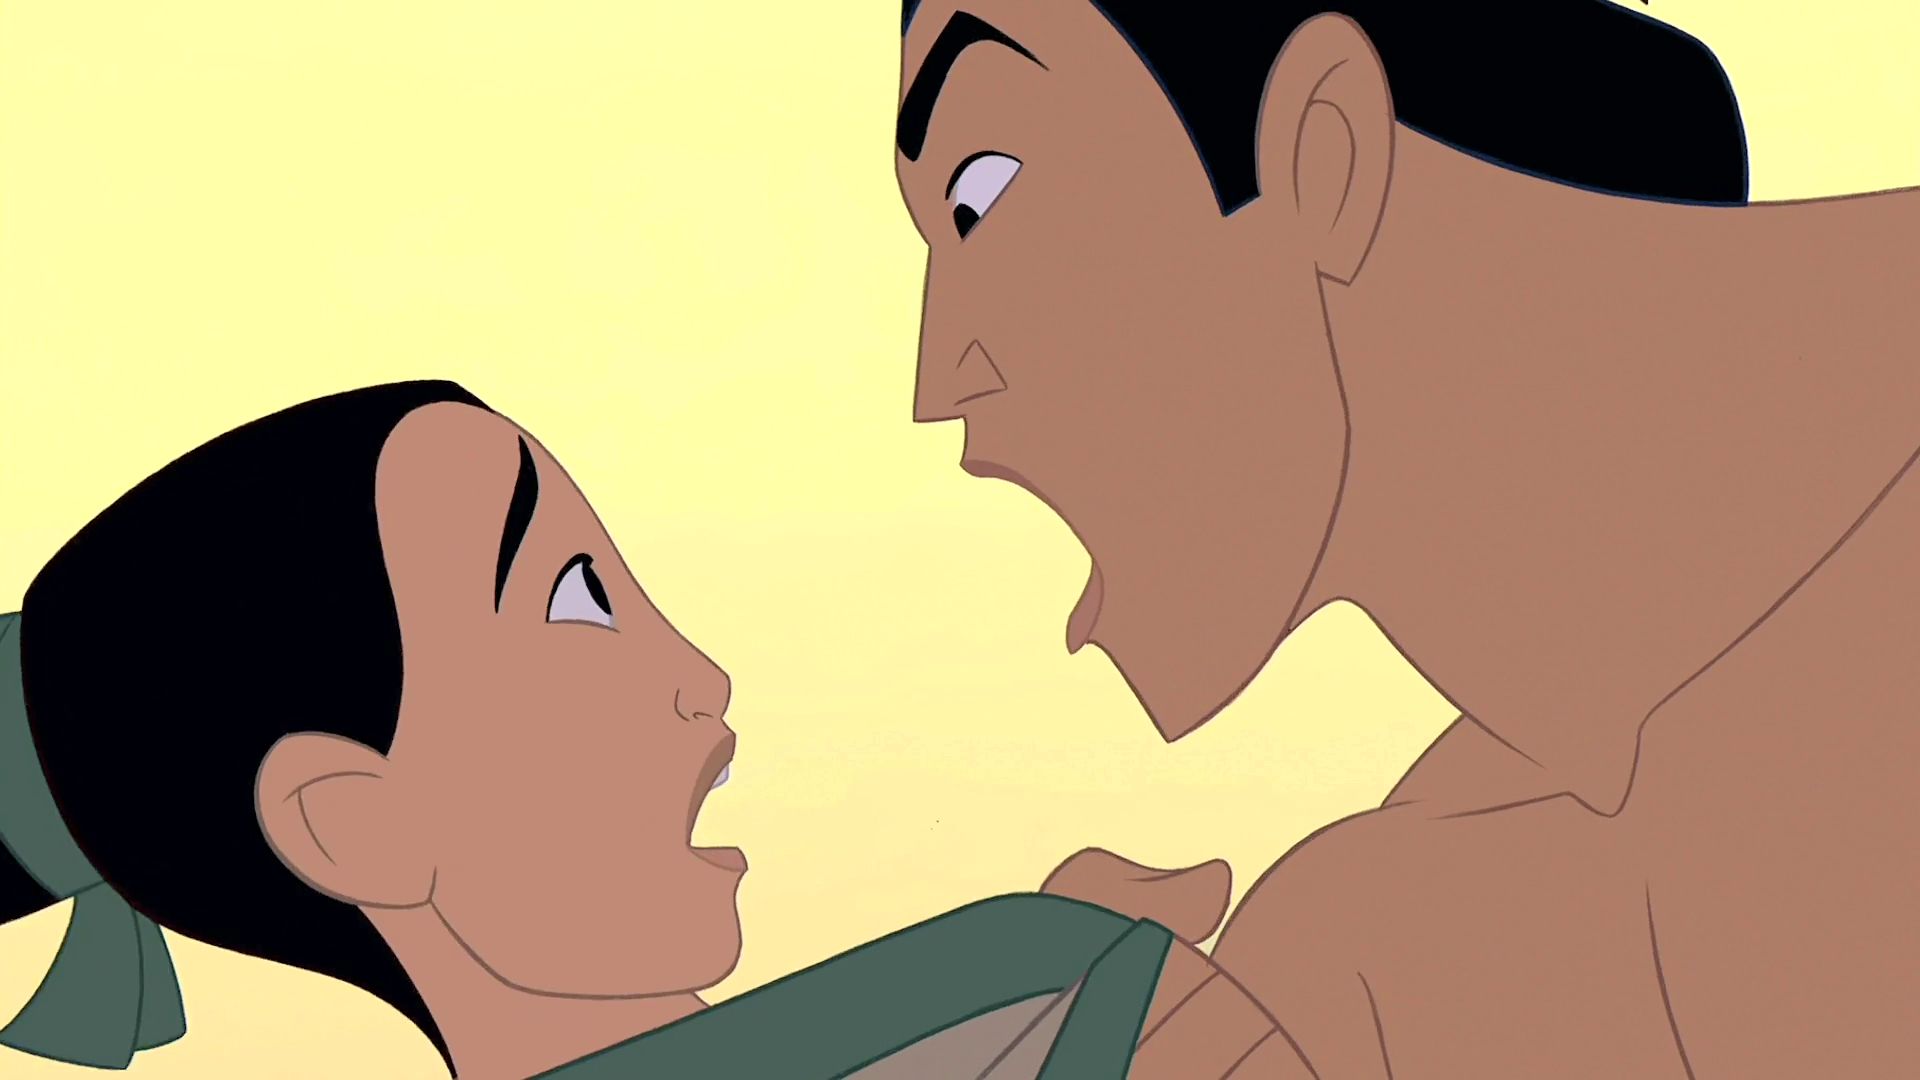 No "I'll Make a Man out of You Mulan" memes have been featur...